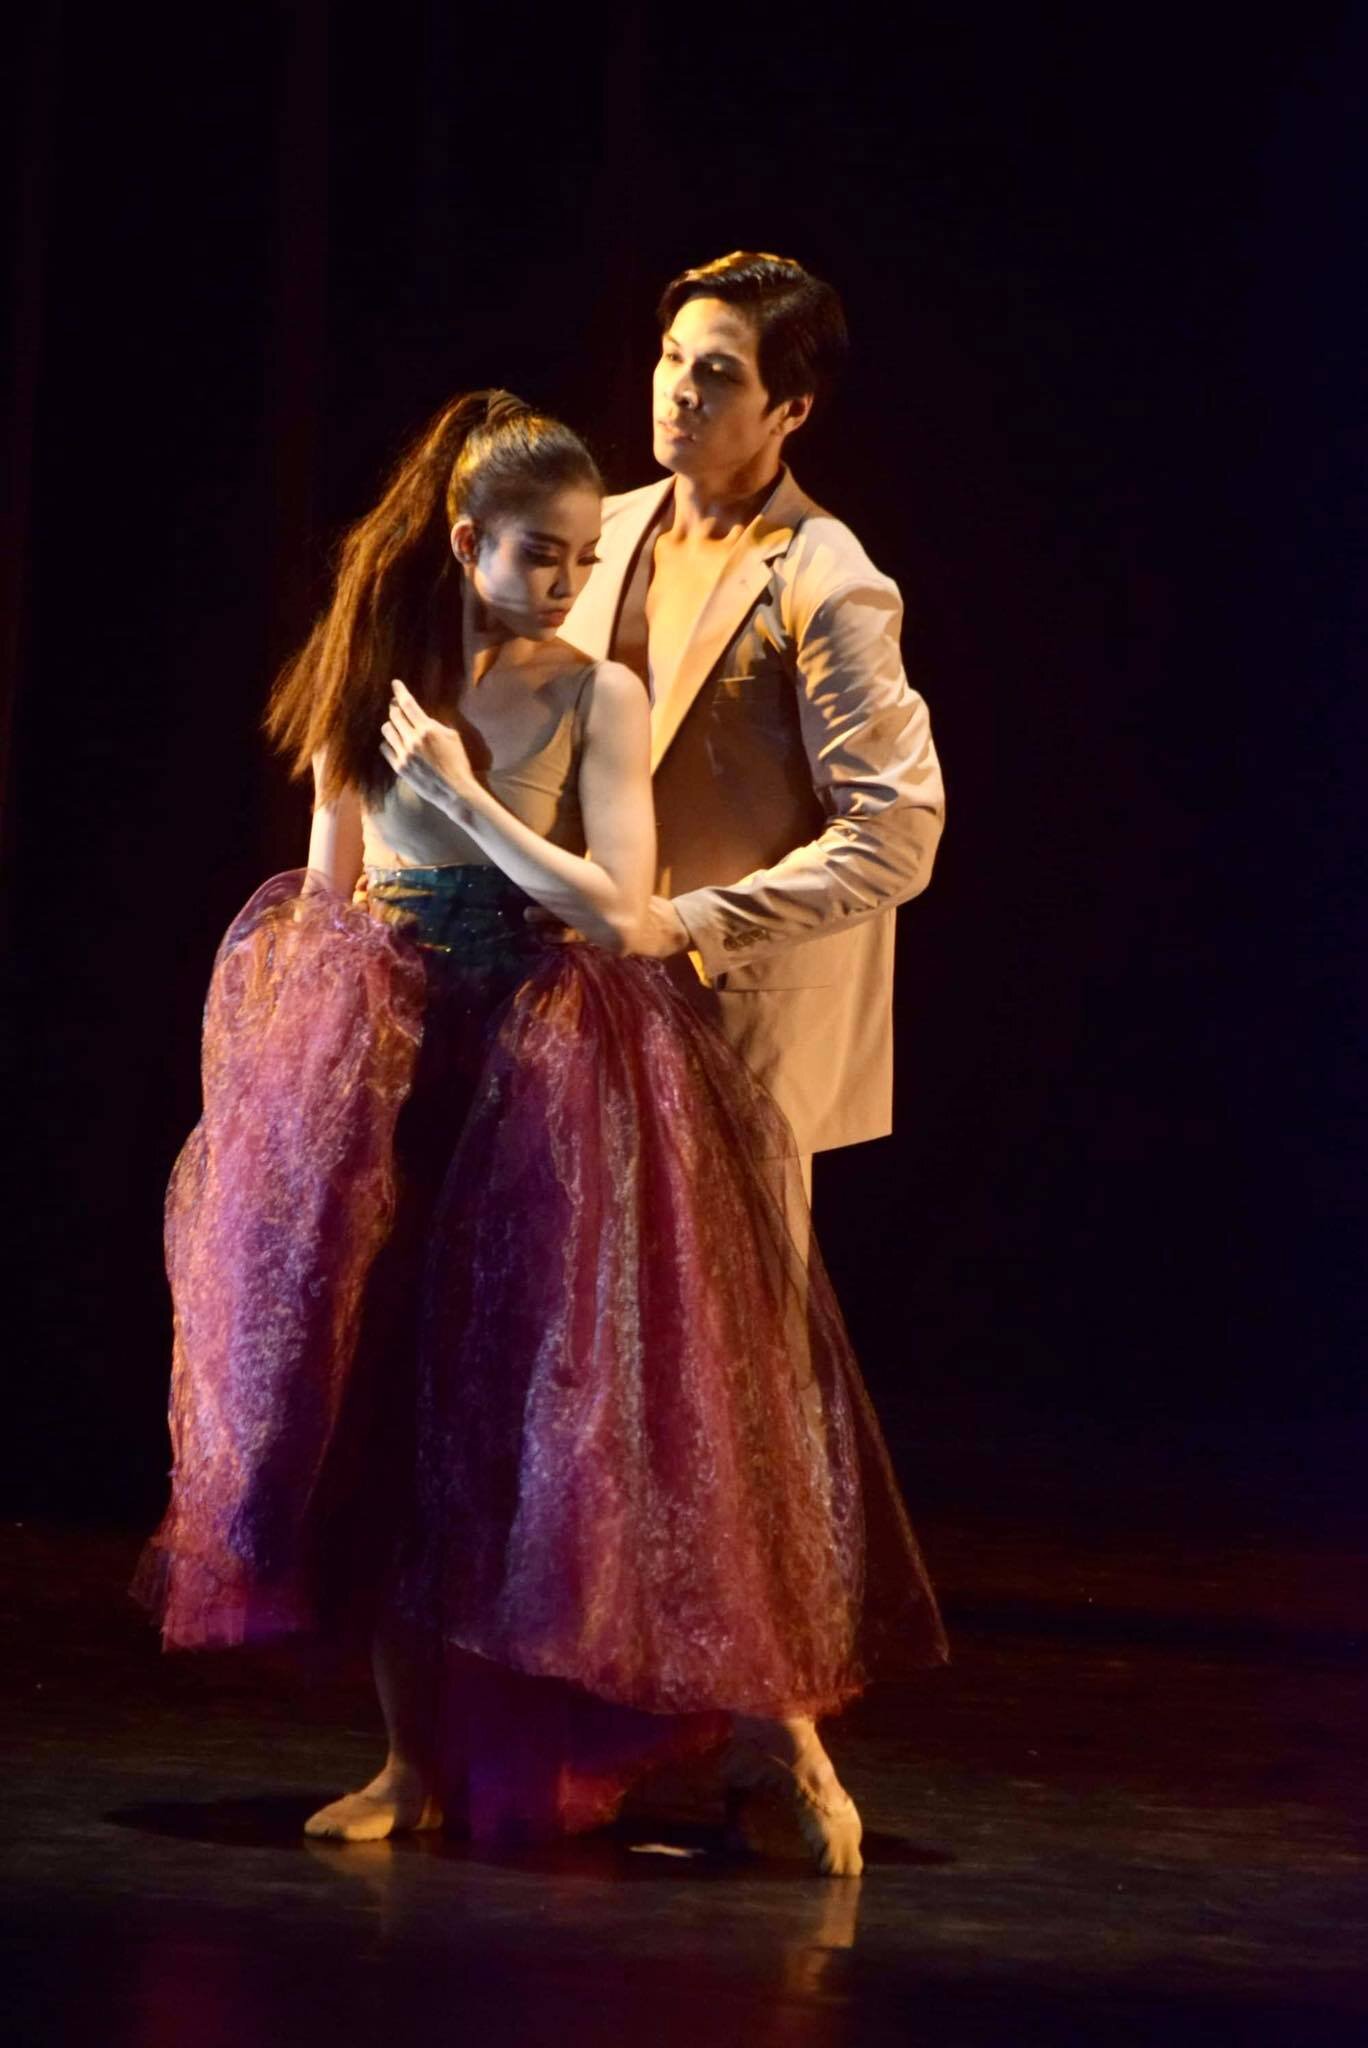    Joan Emery Sia’s pink finery stands out in the brooding  Paloma Muerte,  a choreography by Hamburg Ballet artist Marcelino Libao that also featured Mark Sumaylo and three other dancers. It was one of the numbers performed in  Tuloy ang Sayaw-an , 